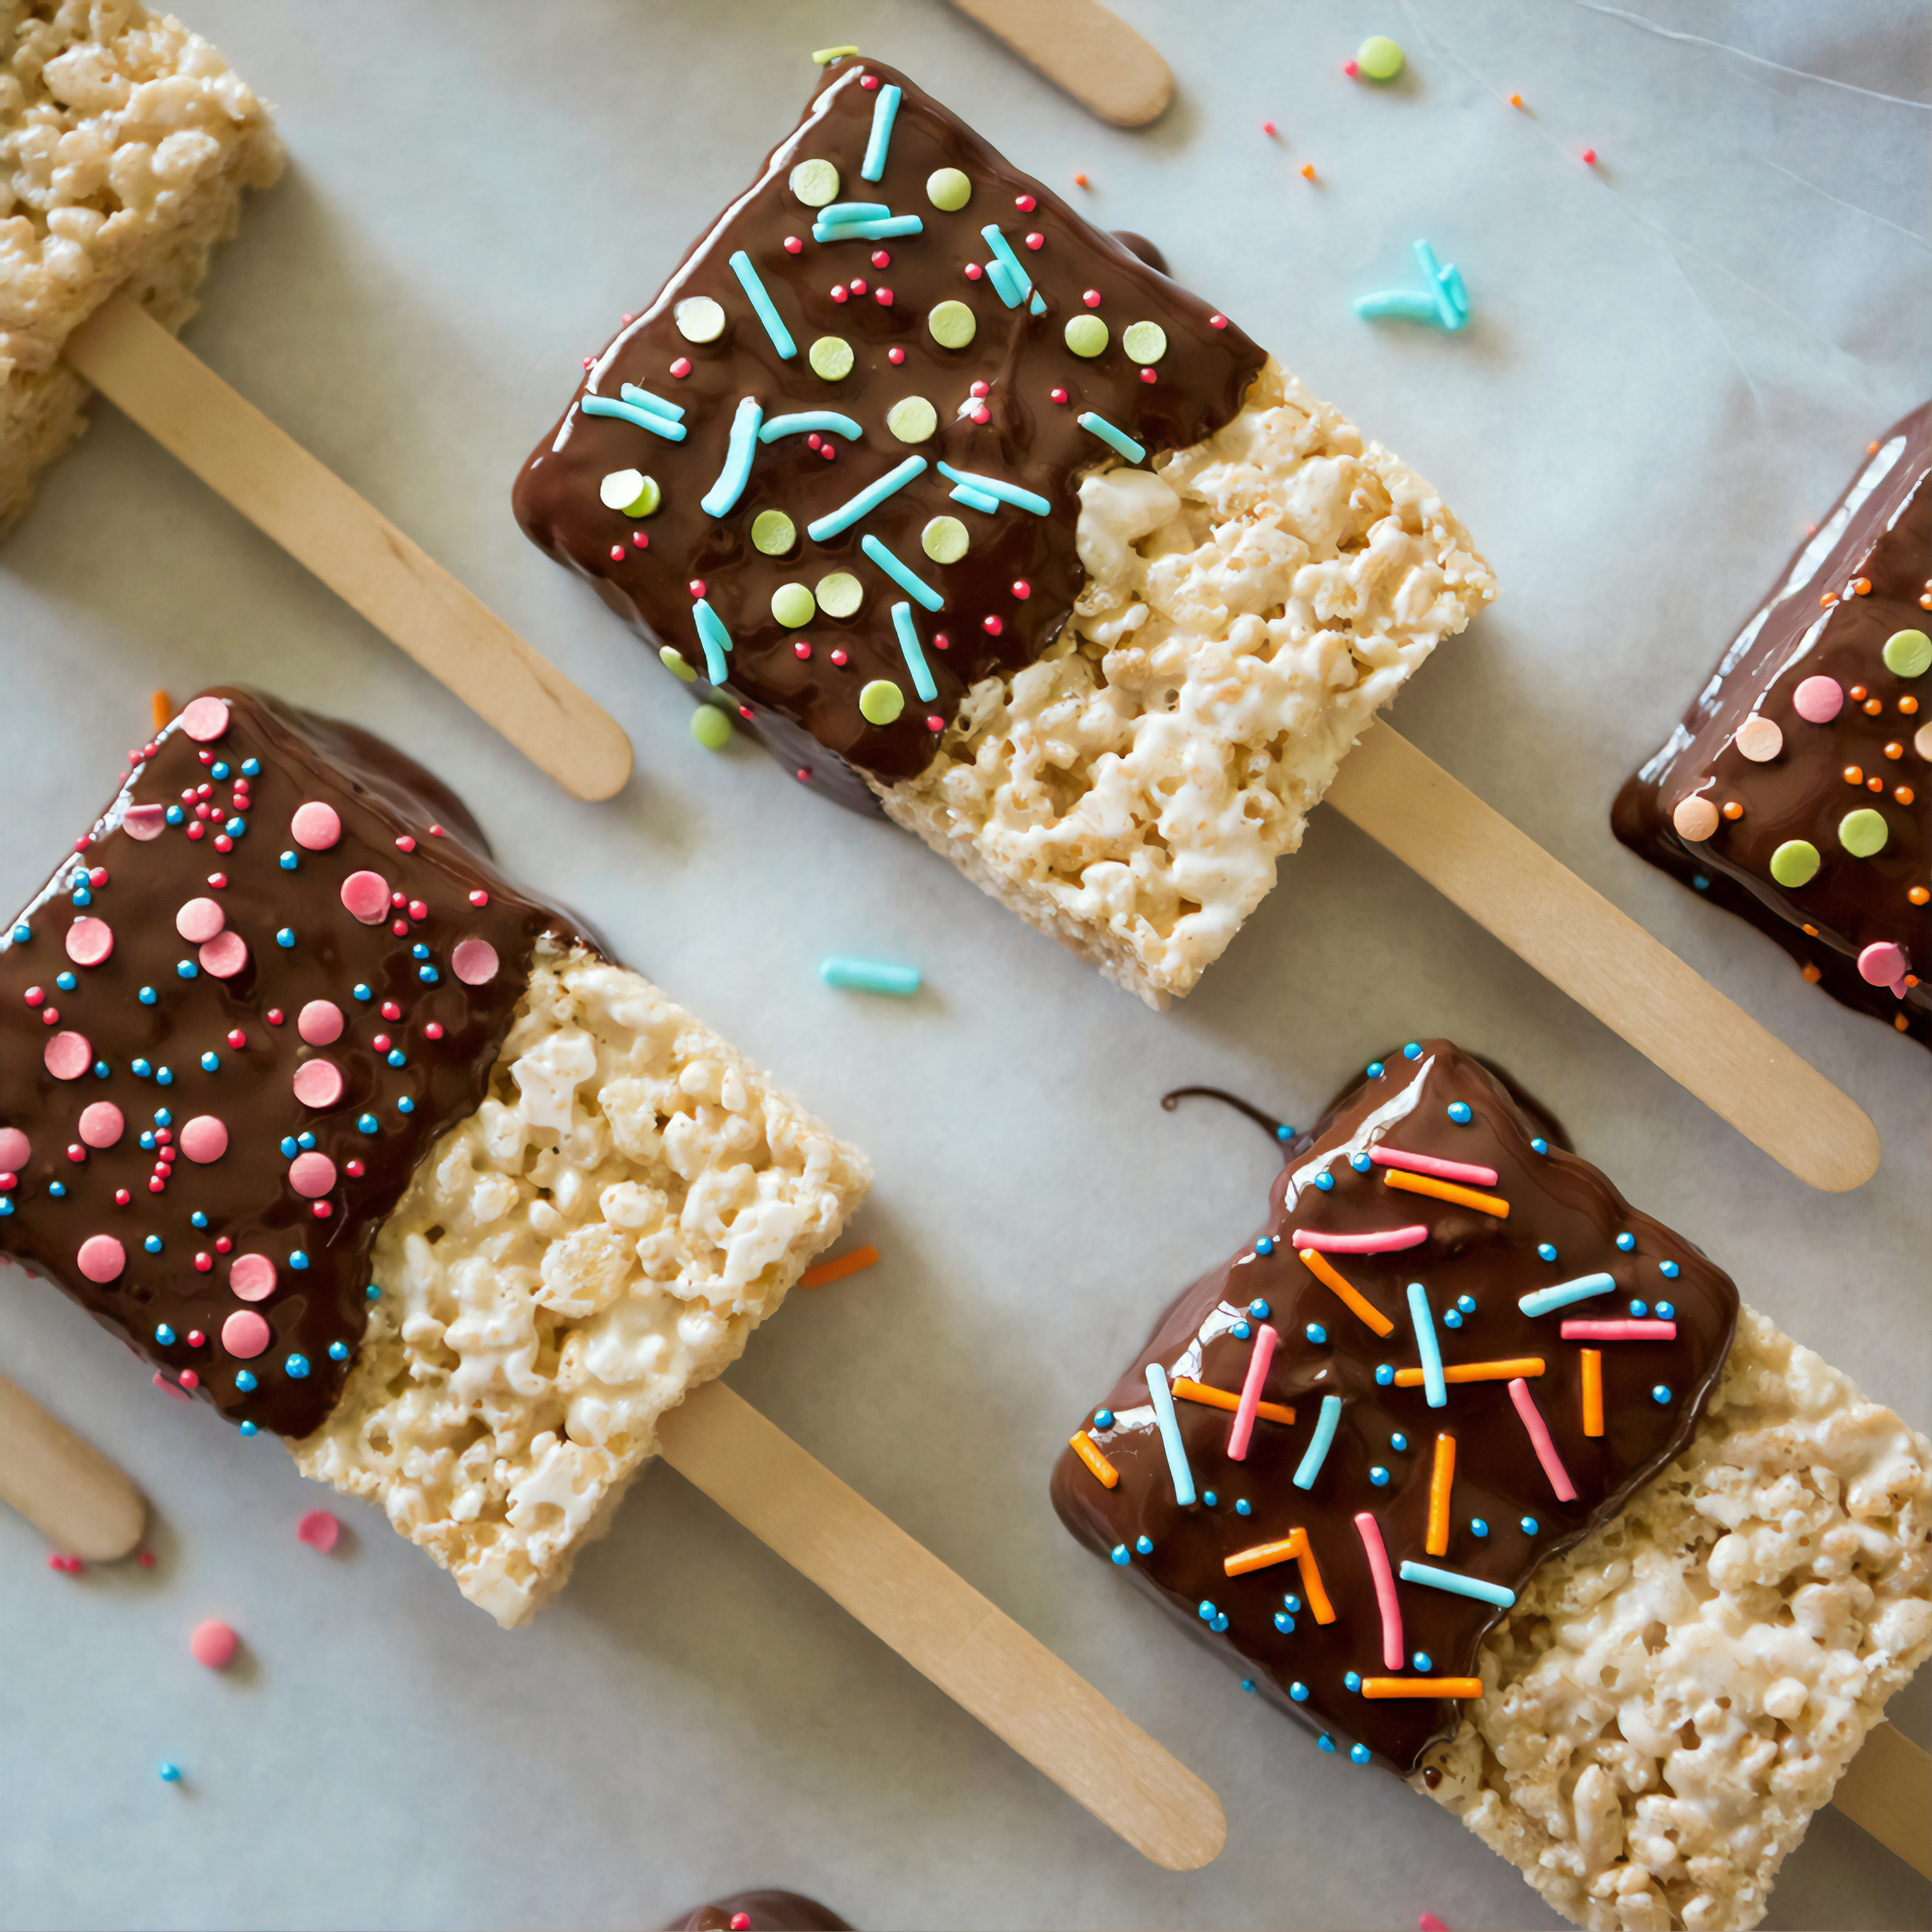 rice krispie treats on popsicle sticks dipped in chocolate